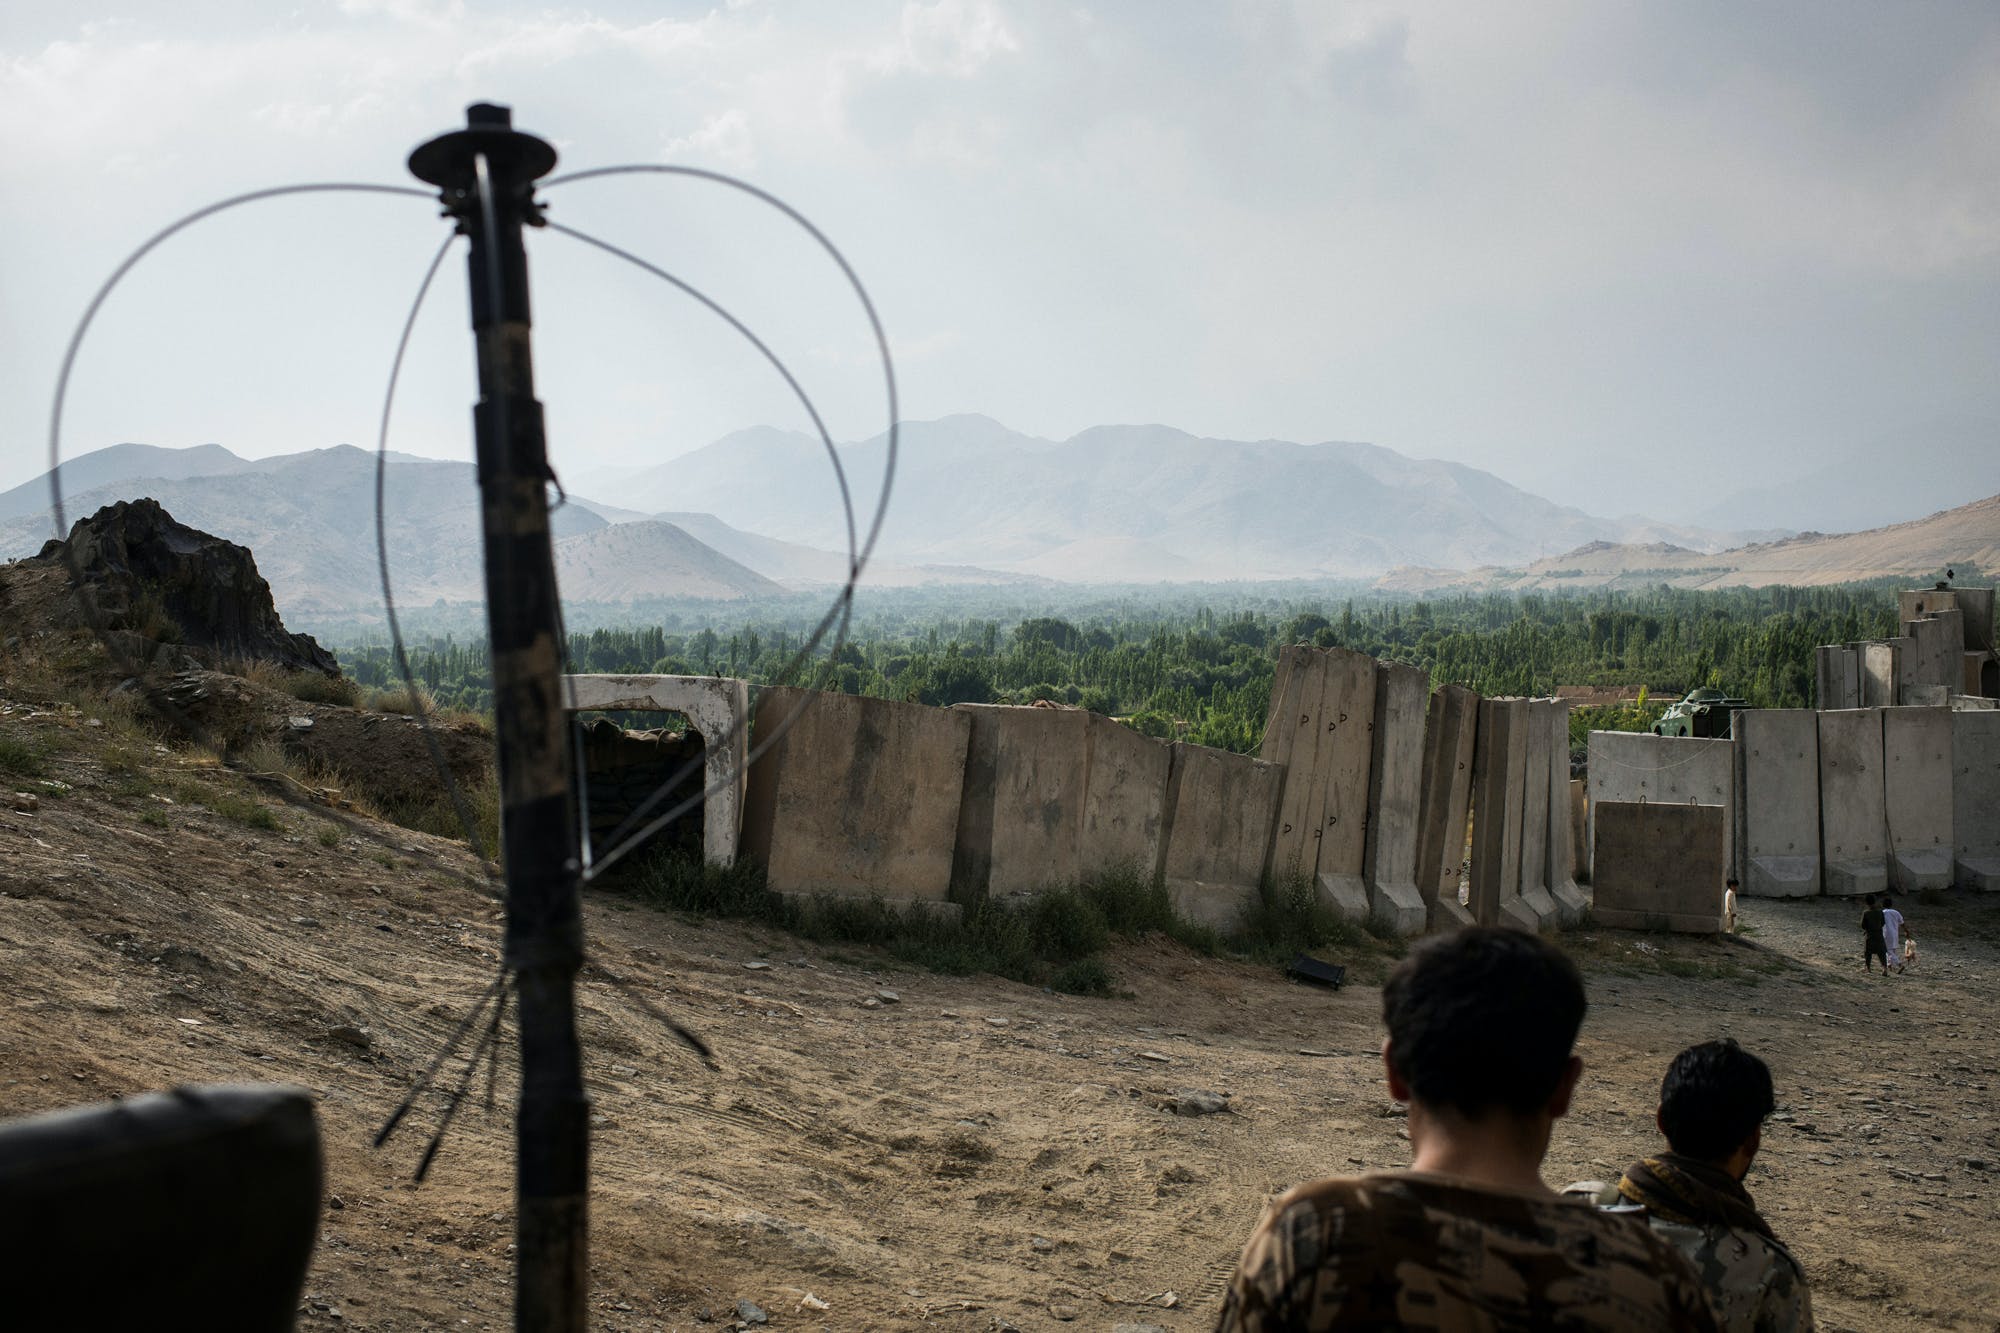 Inside an Afghan National Police checkpoint on the outskirts of Maidan Shahr, the capital of Wardak Province, which has come under increased pressure from the Taliban since the insurgent group signed a peace deal with the U.S. government in February.